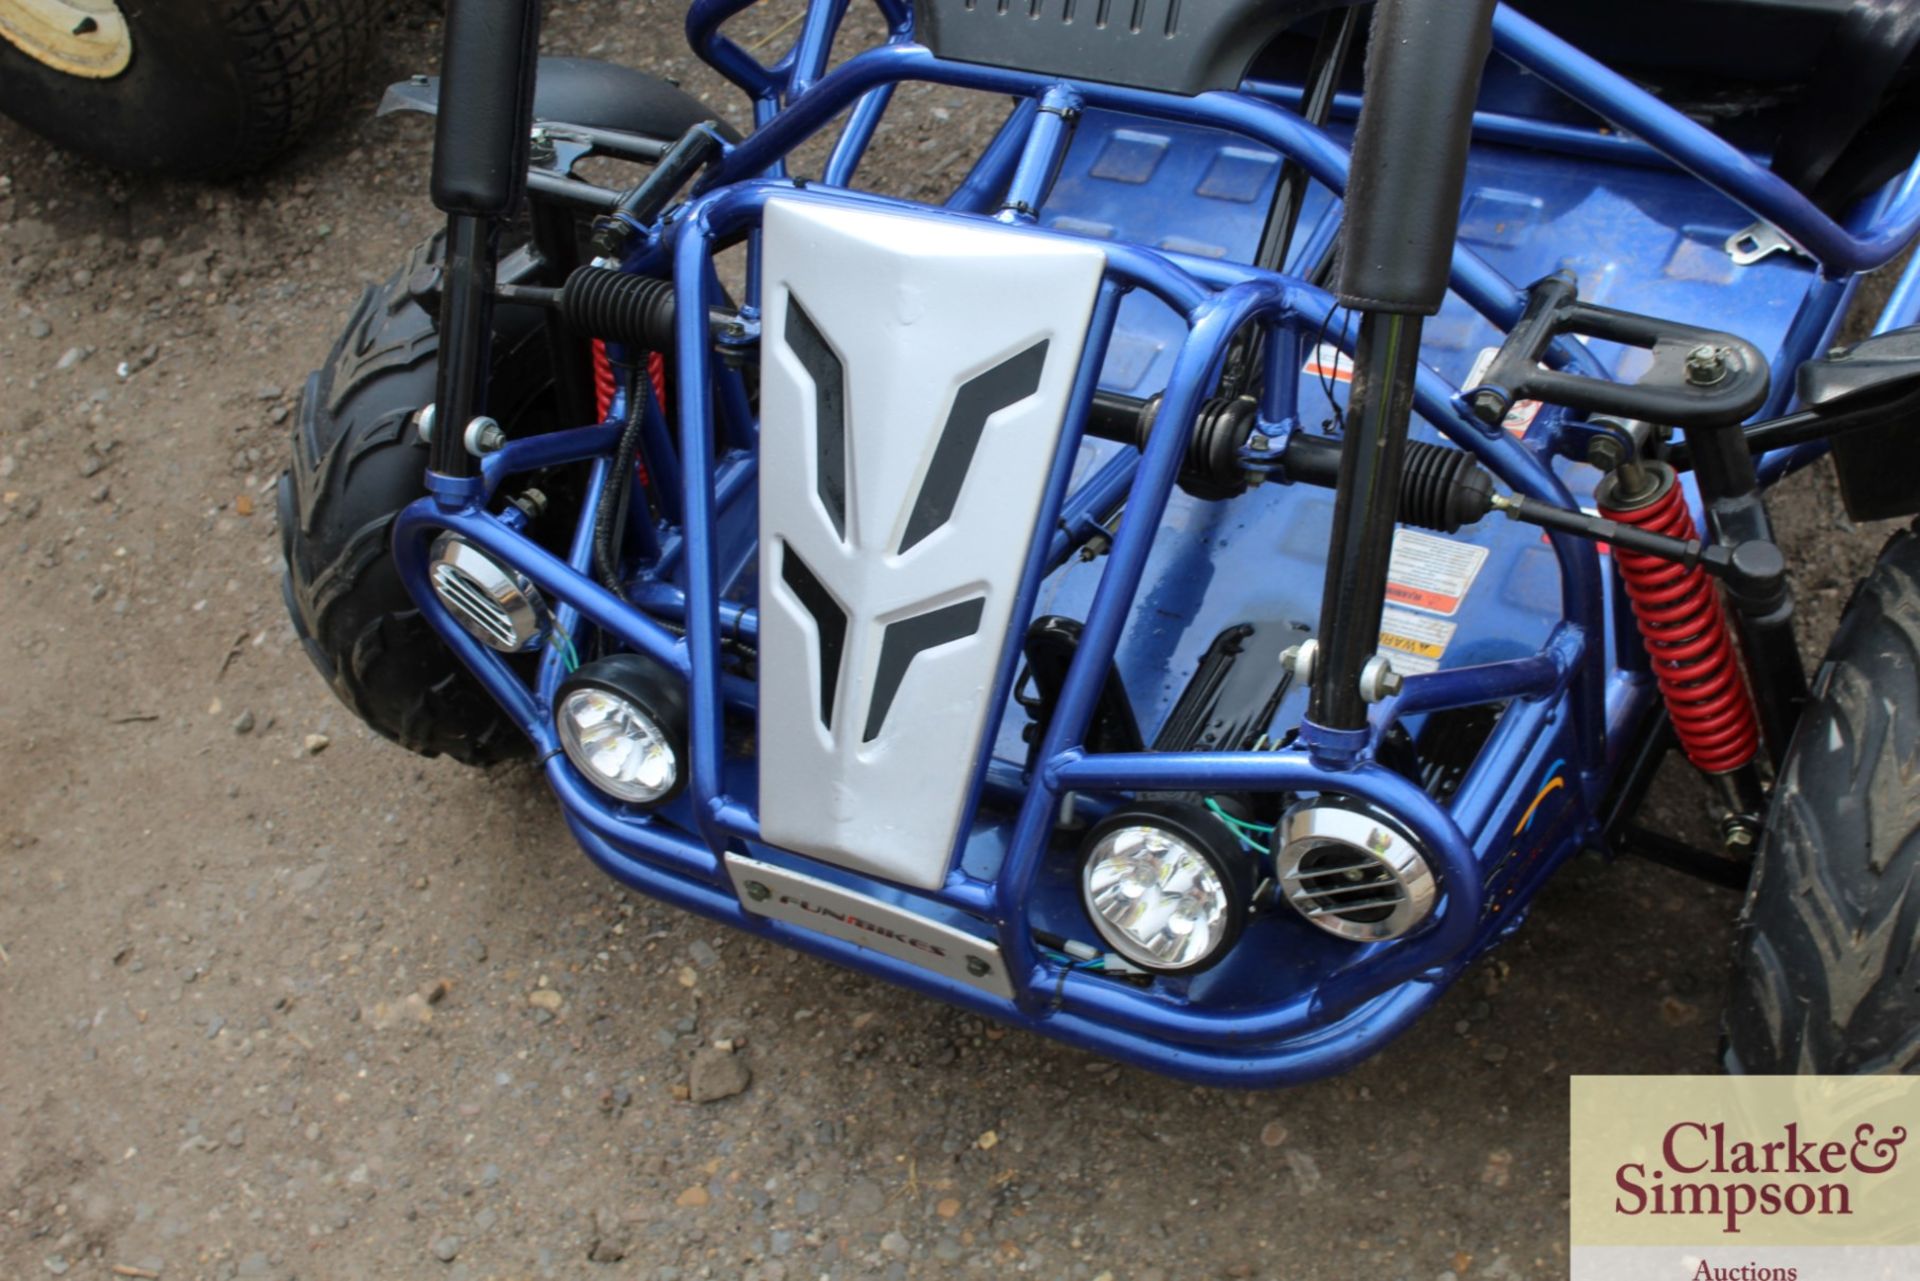 FunBikes GT80 200cc 2WD off road go cart. 2015. Owned from new. - Image 9 of 9